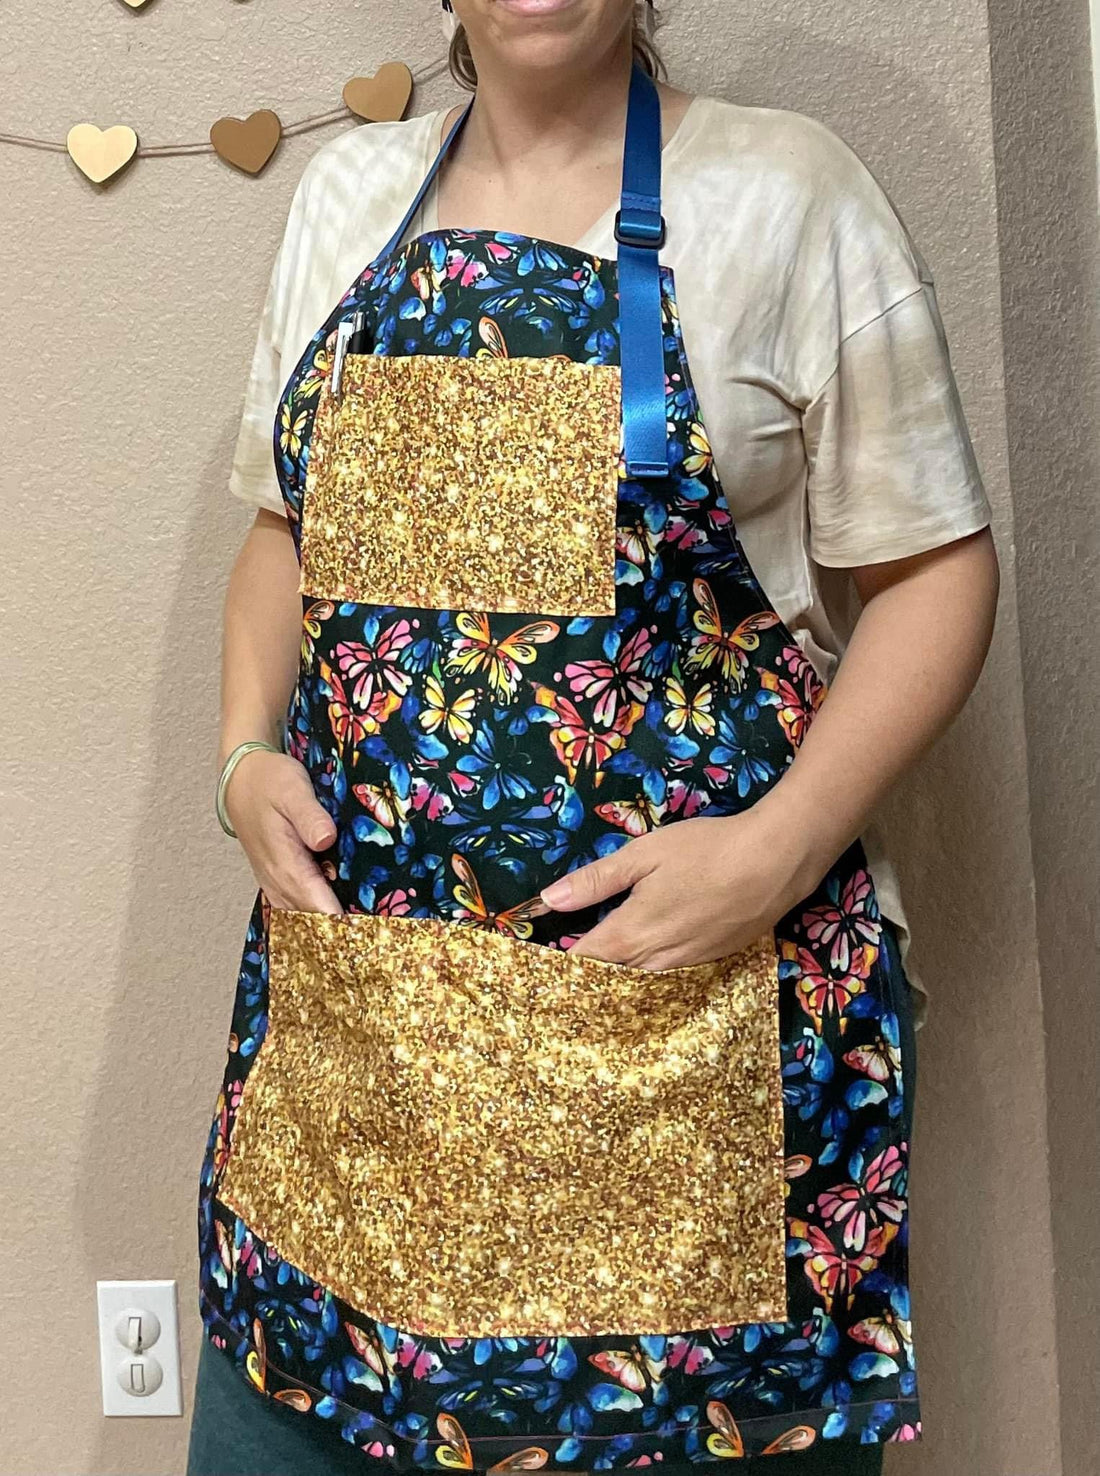 Aaron Apron PDF Sewing Pattern (Includes an A0 File, Projector File, and Video!)